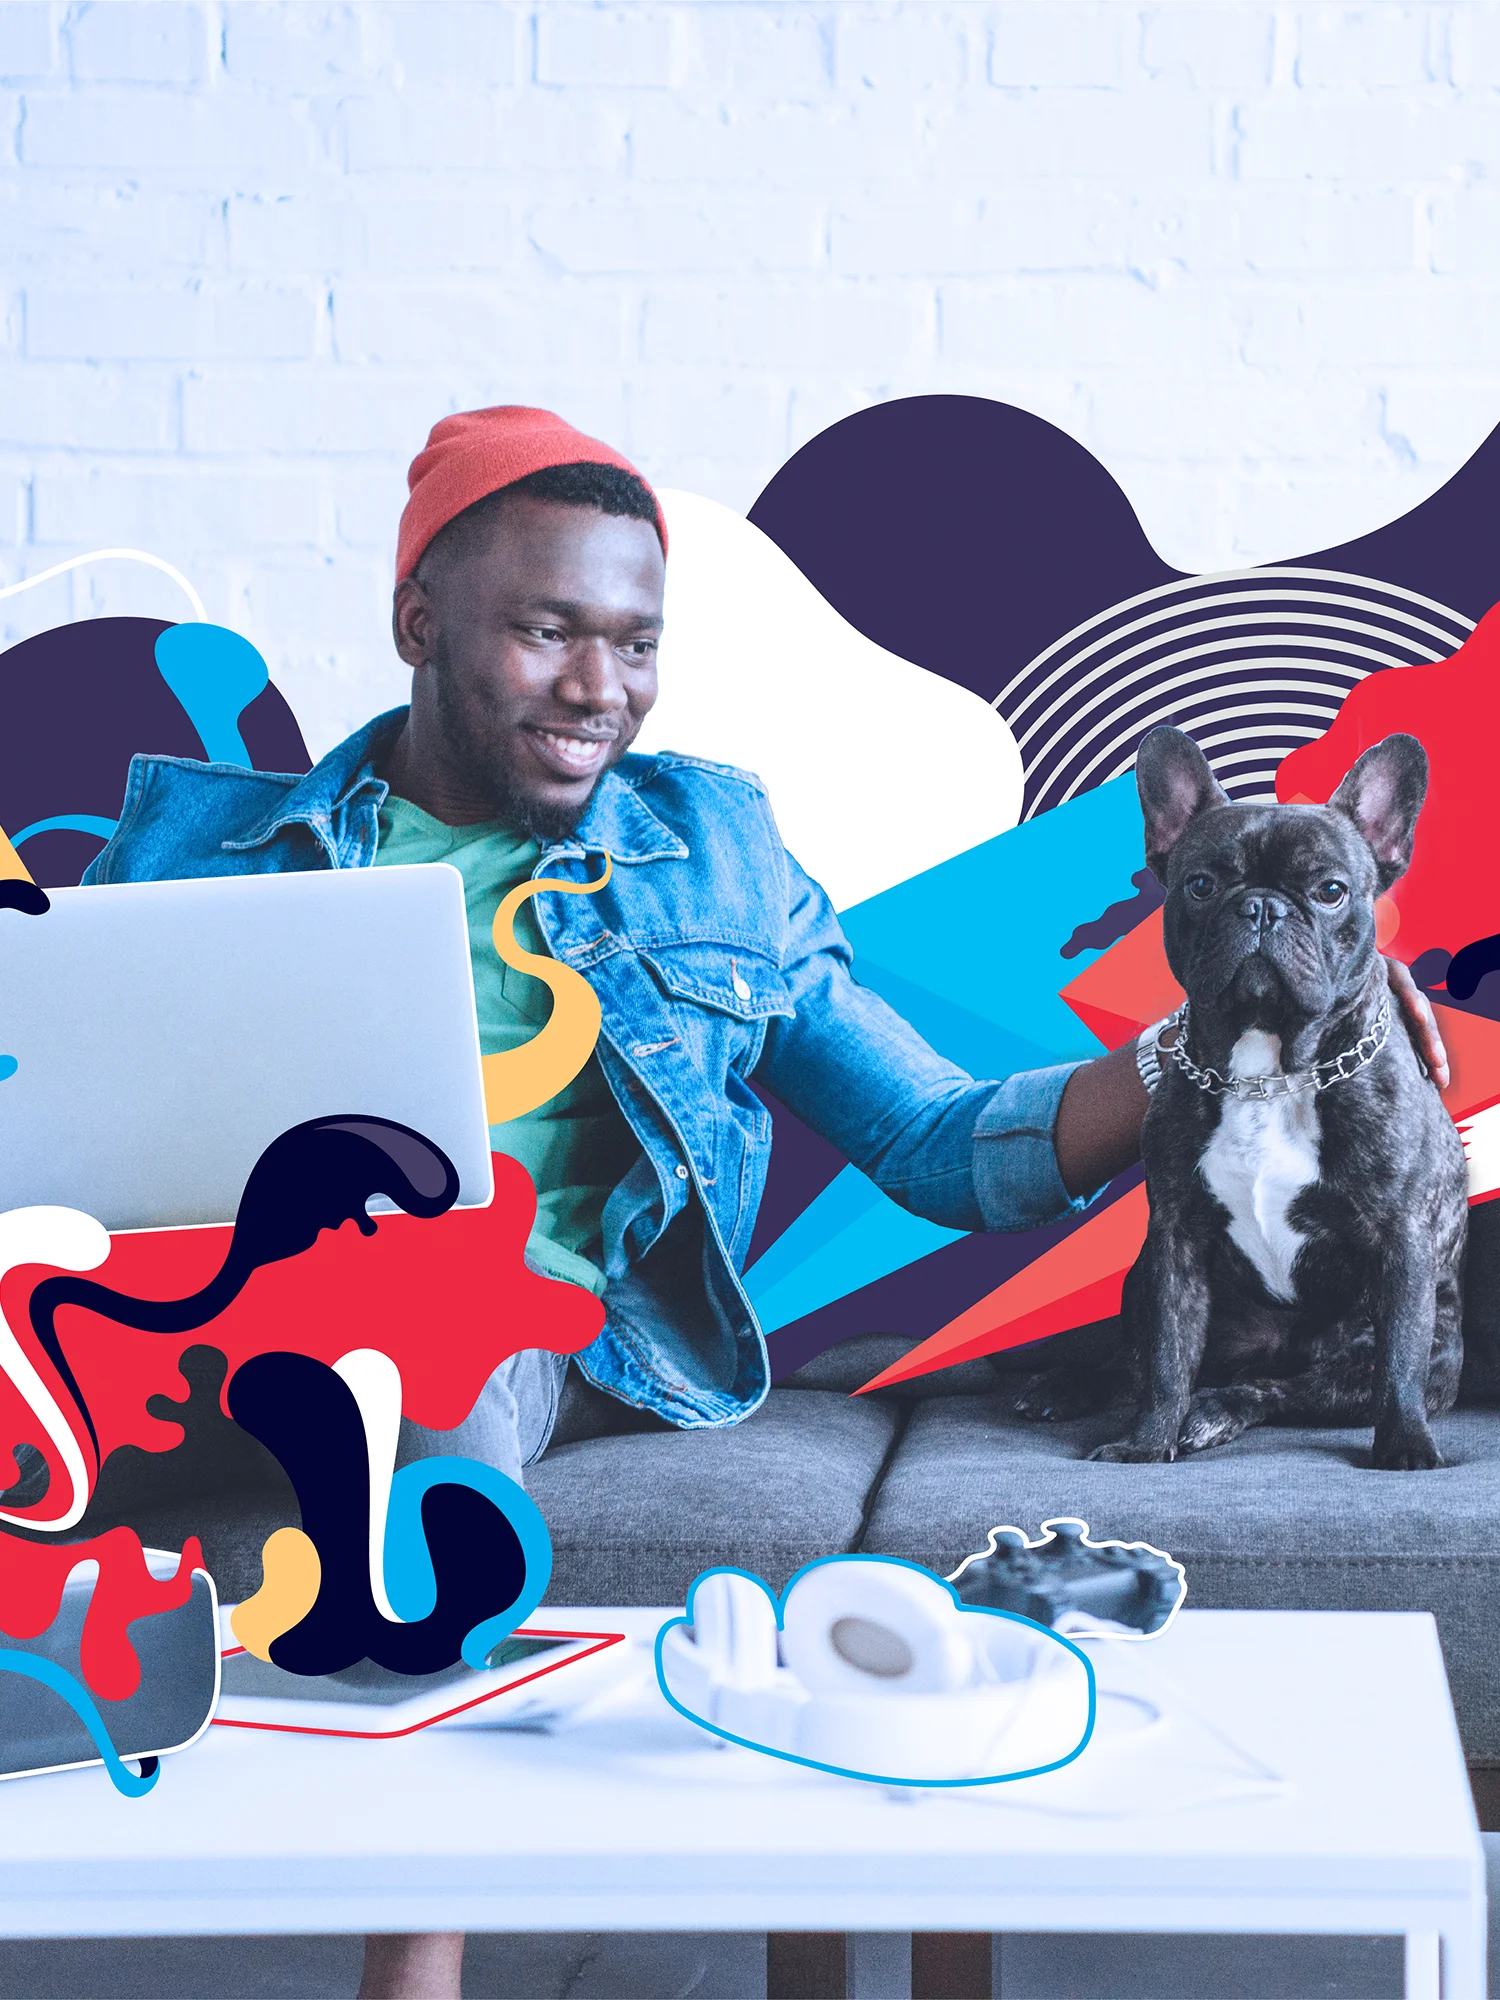 Man sitting on a couch with his dog using devices and illustrative graphics around them